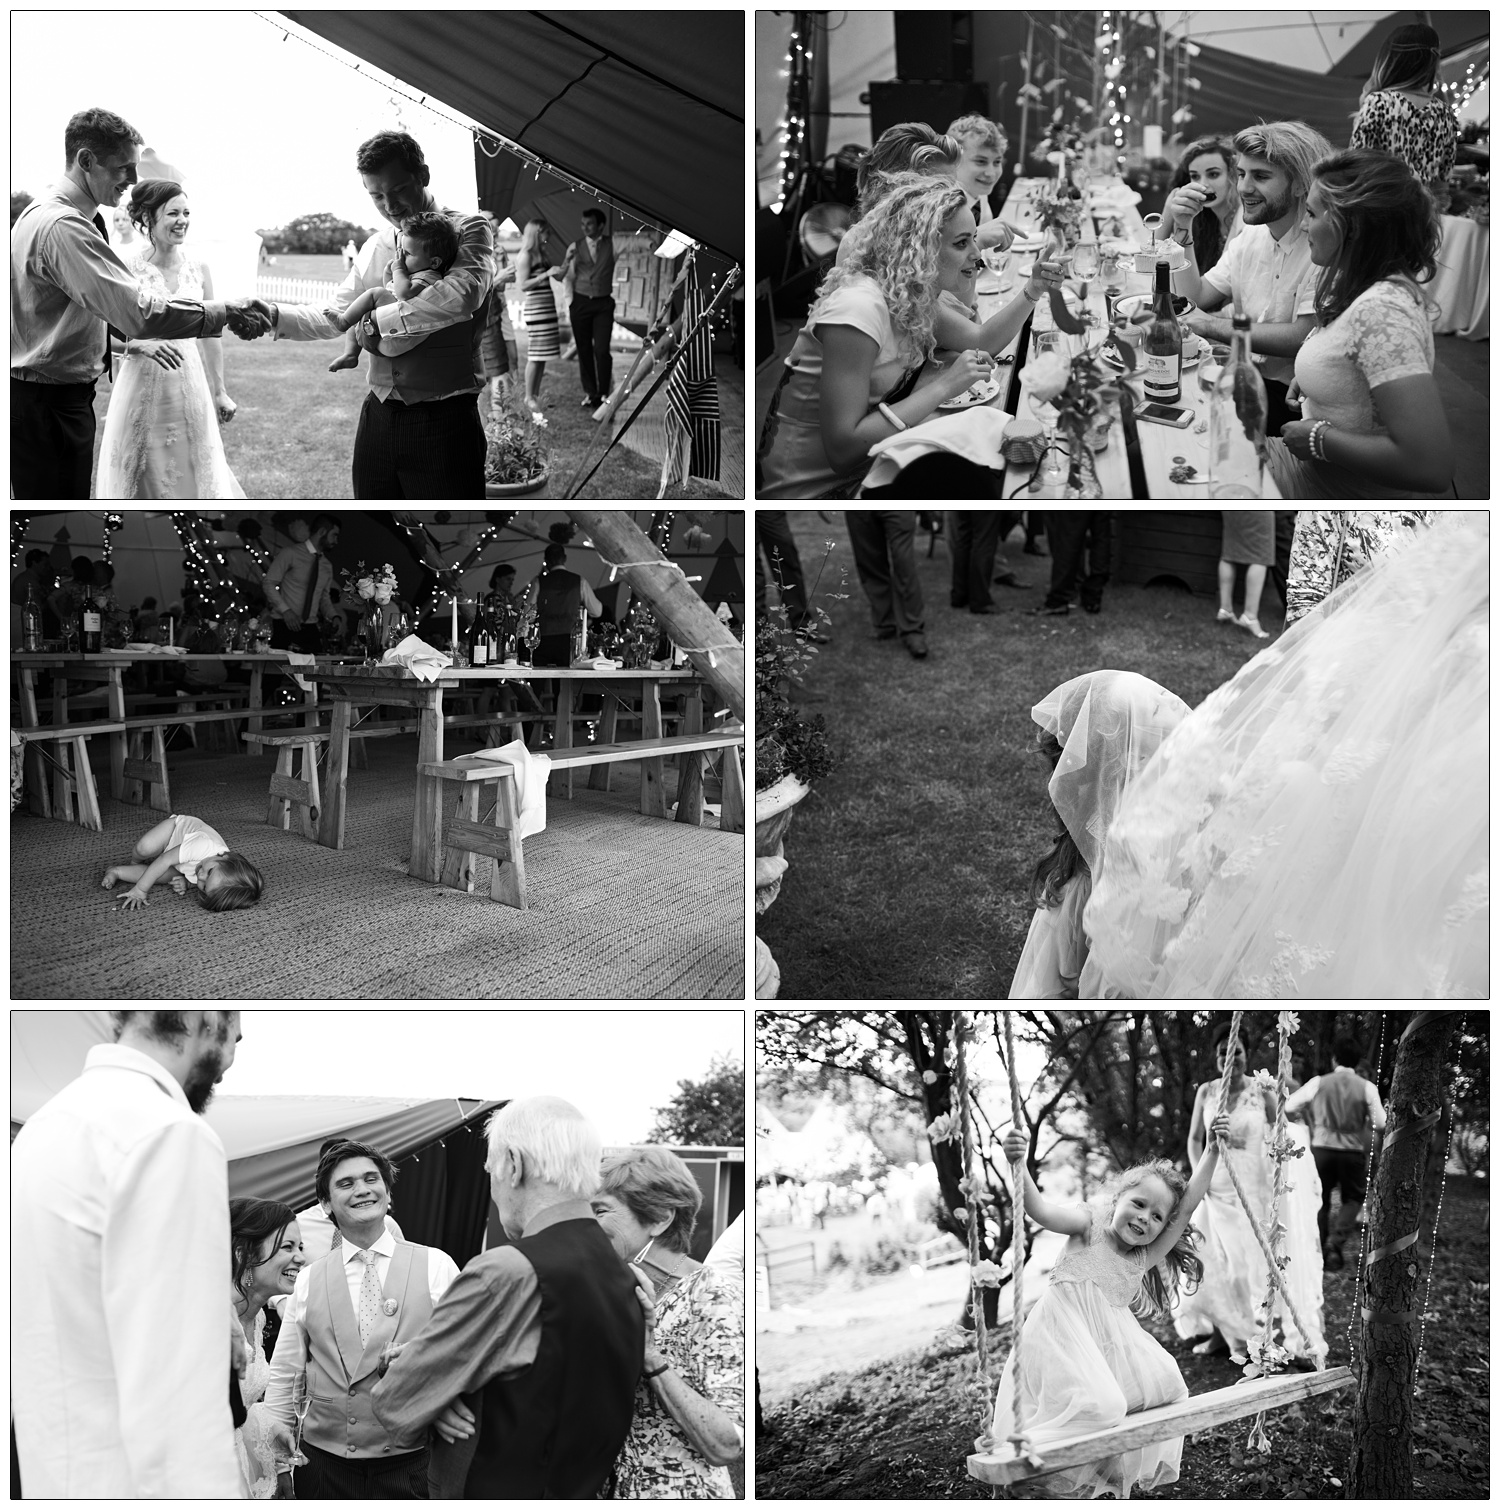 Wedding photojournalism style pictures from a wedding reception near Chelmsford. A man holds a baby, people are sat at a bench table for dinner. A toddler lies on the ground. A girl hides under a wedding dress.